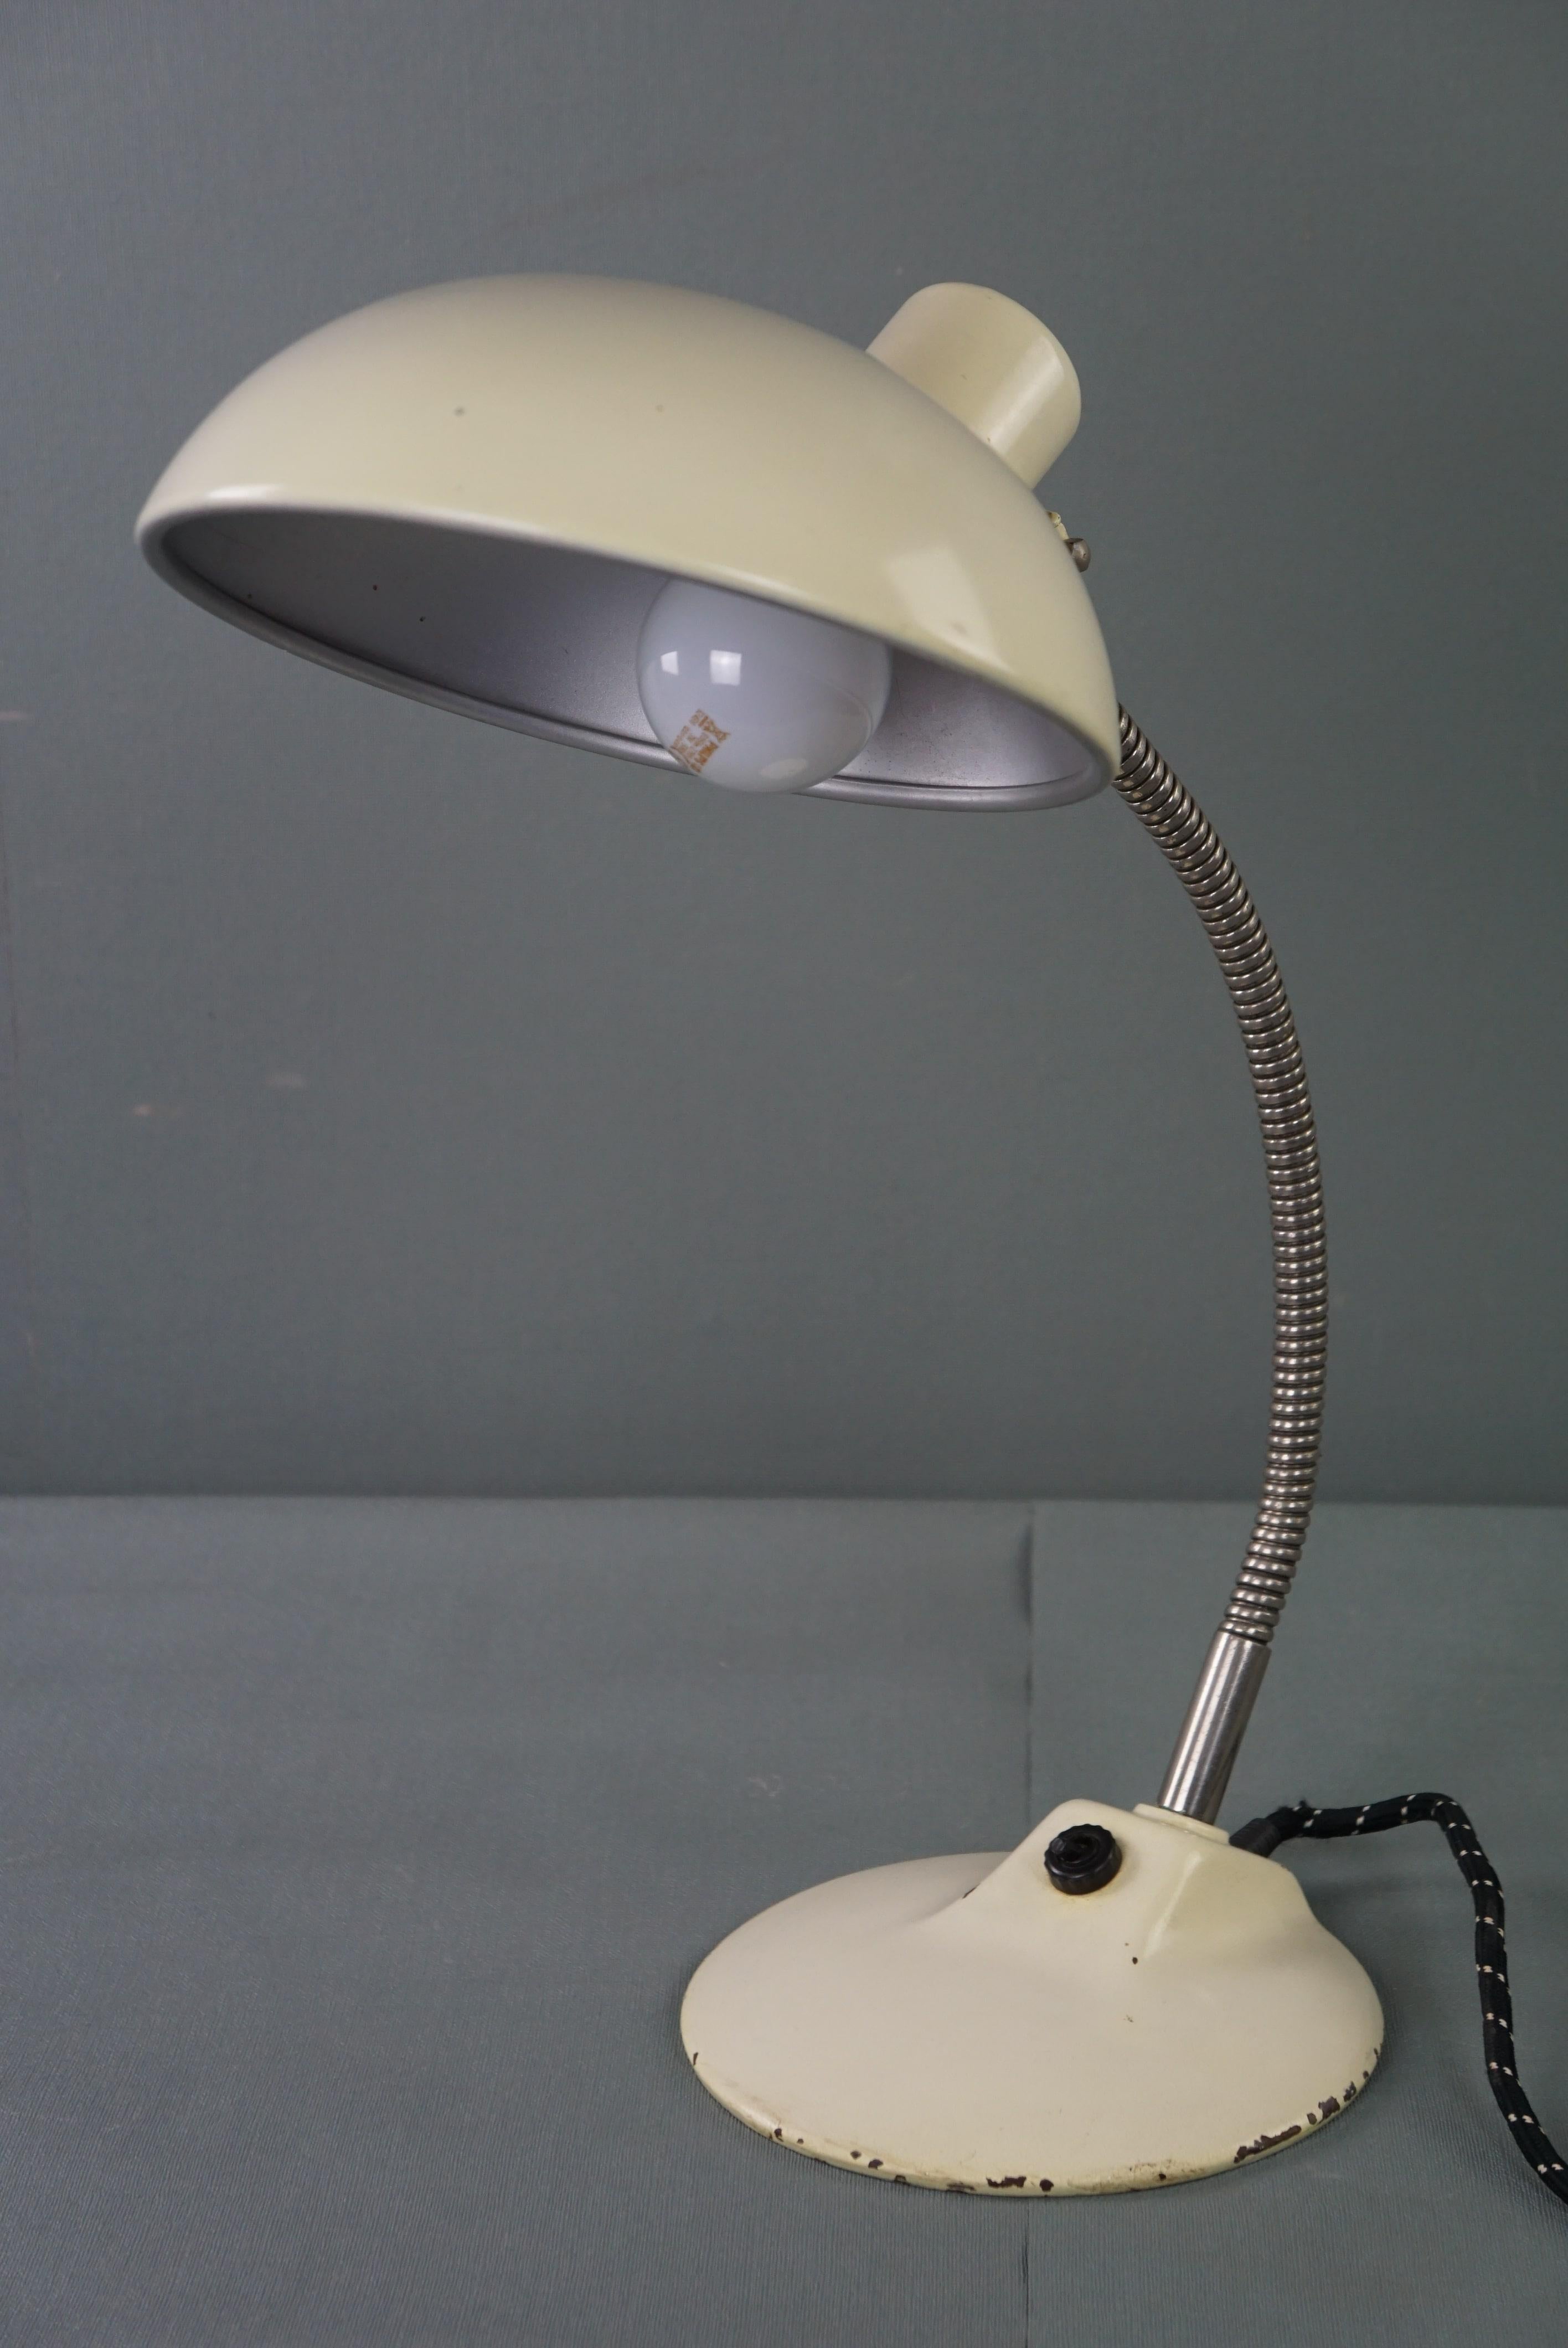 Offered is this very nice white vintage metal lamp/desk lamp in Bauhaus style from the 1960s.

This beautiful vintage 1960s lamp looks great on your desk, but also on your nightstand, dresser, or table. This lamp has a bendable neck, and you switch